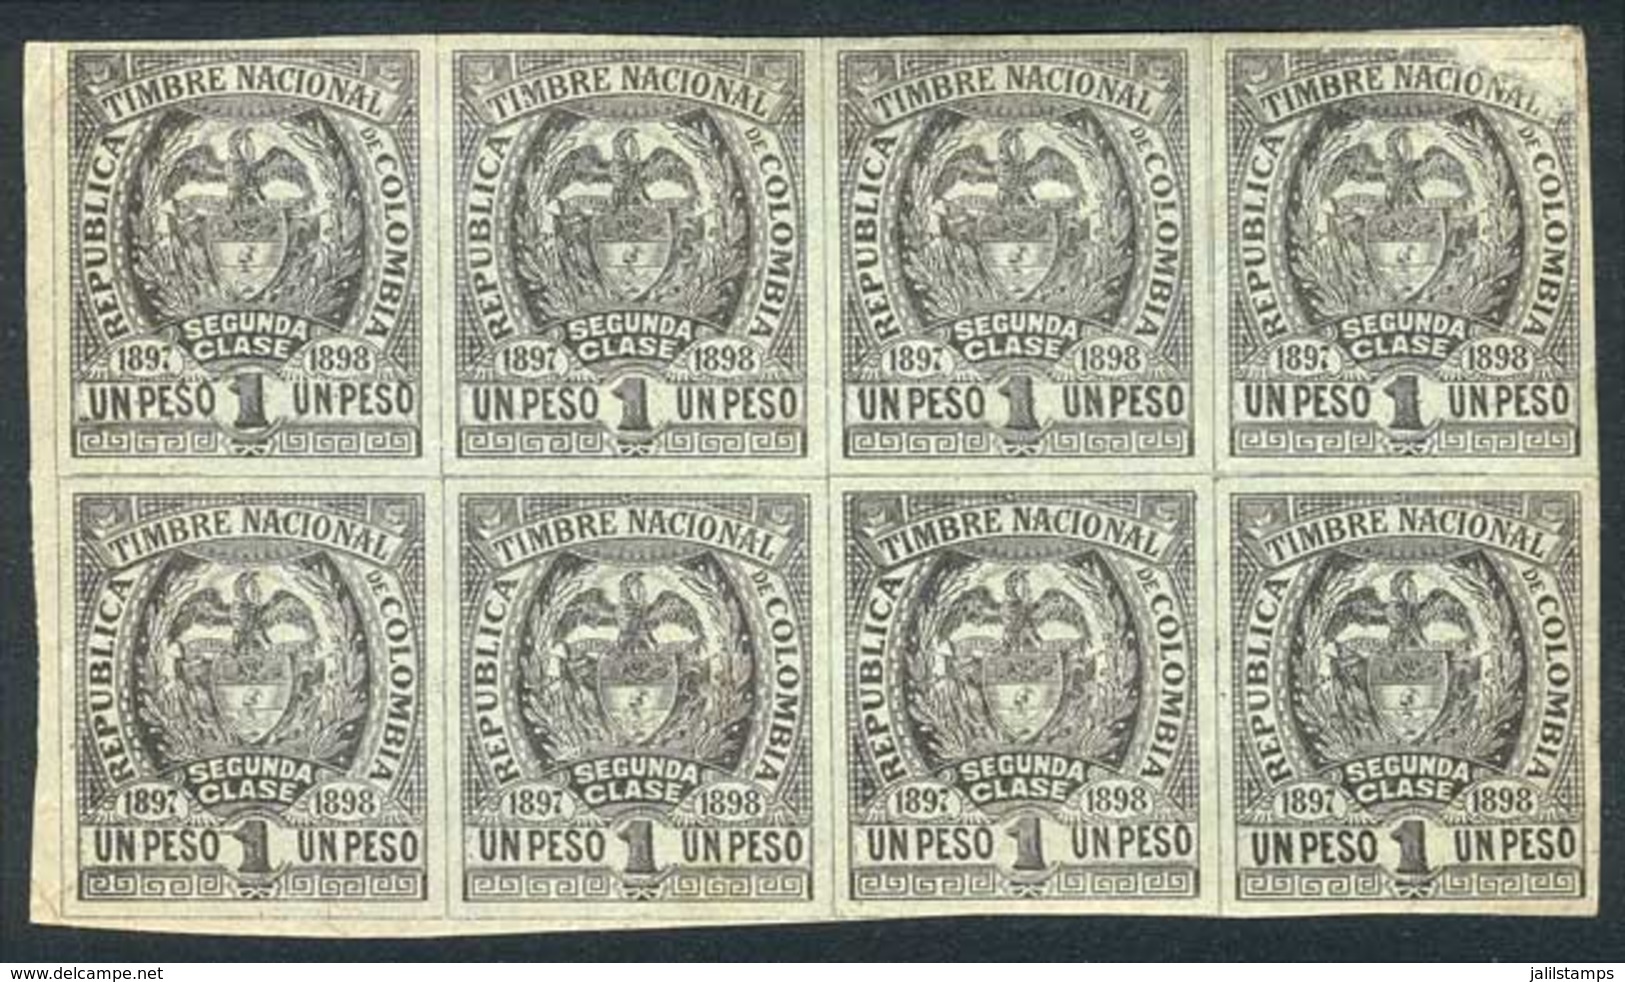 COLOMBIA: Timbre Nacional, 1895-1896 1P. Third Class, Block Oof 8 Mint With Gum, Printed On Paper Of Unsurfaced Front, B - Kolumbien